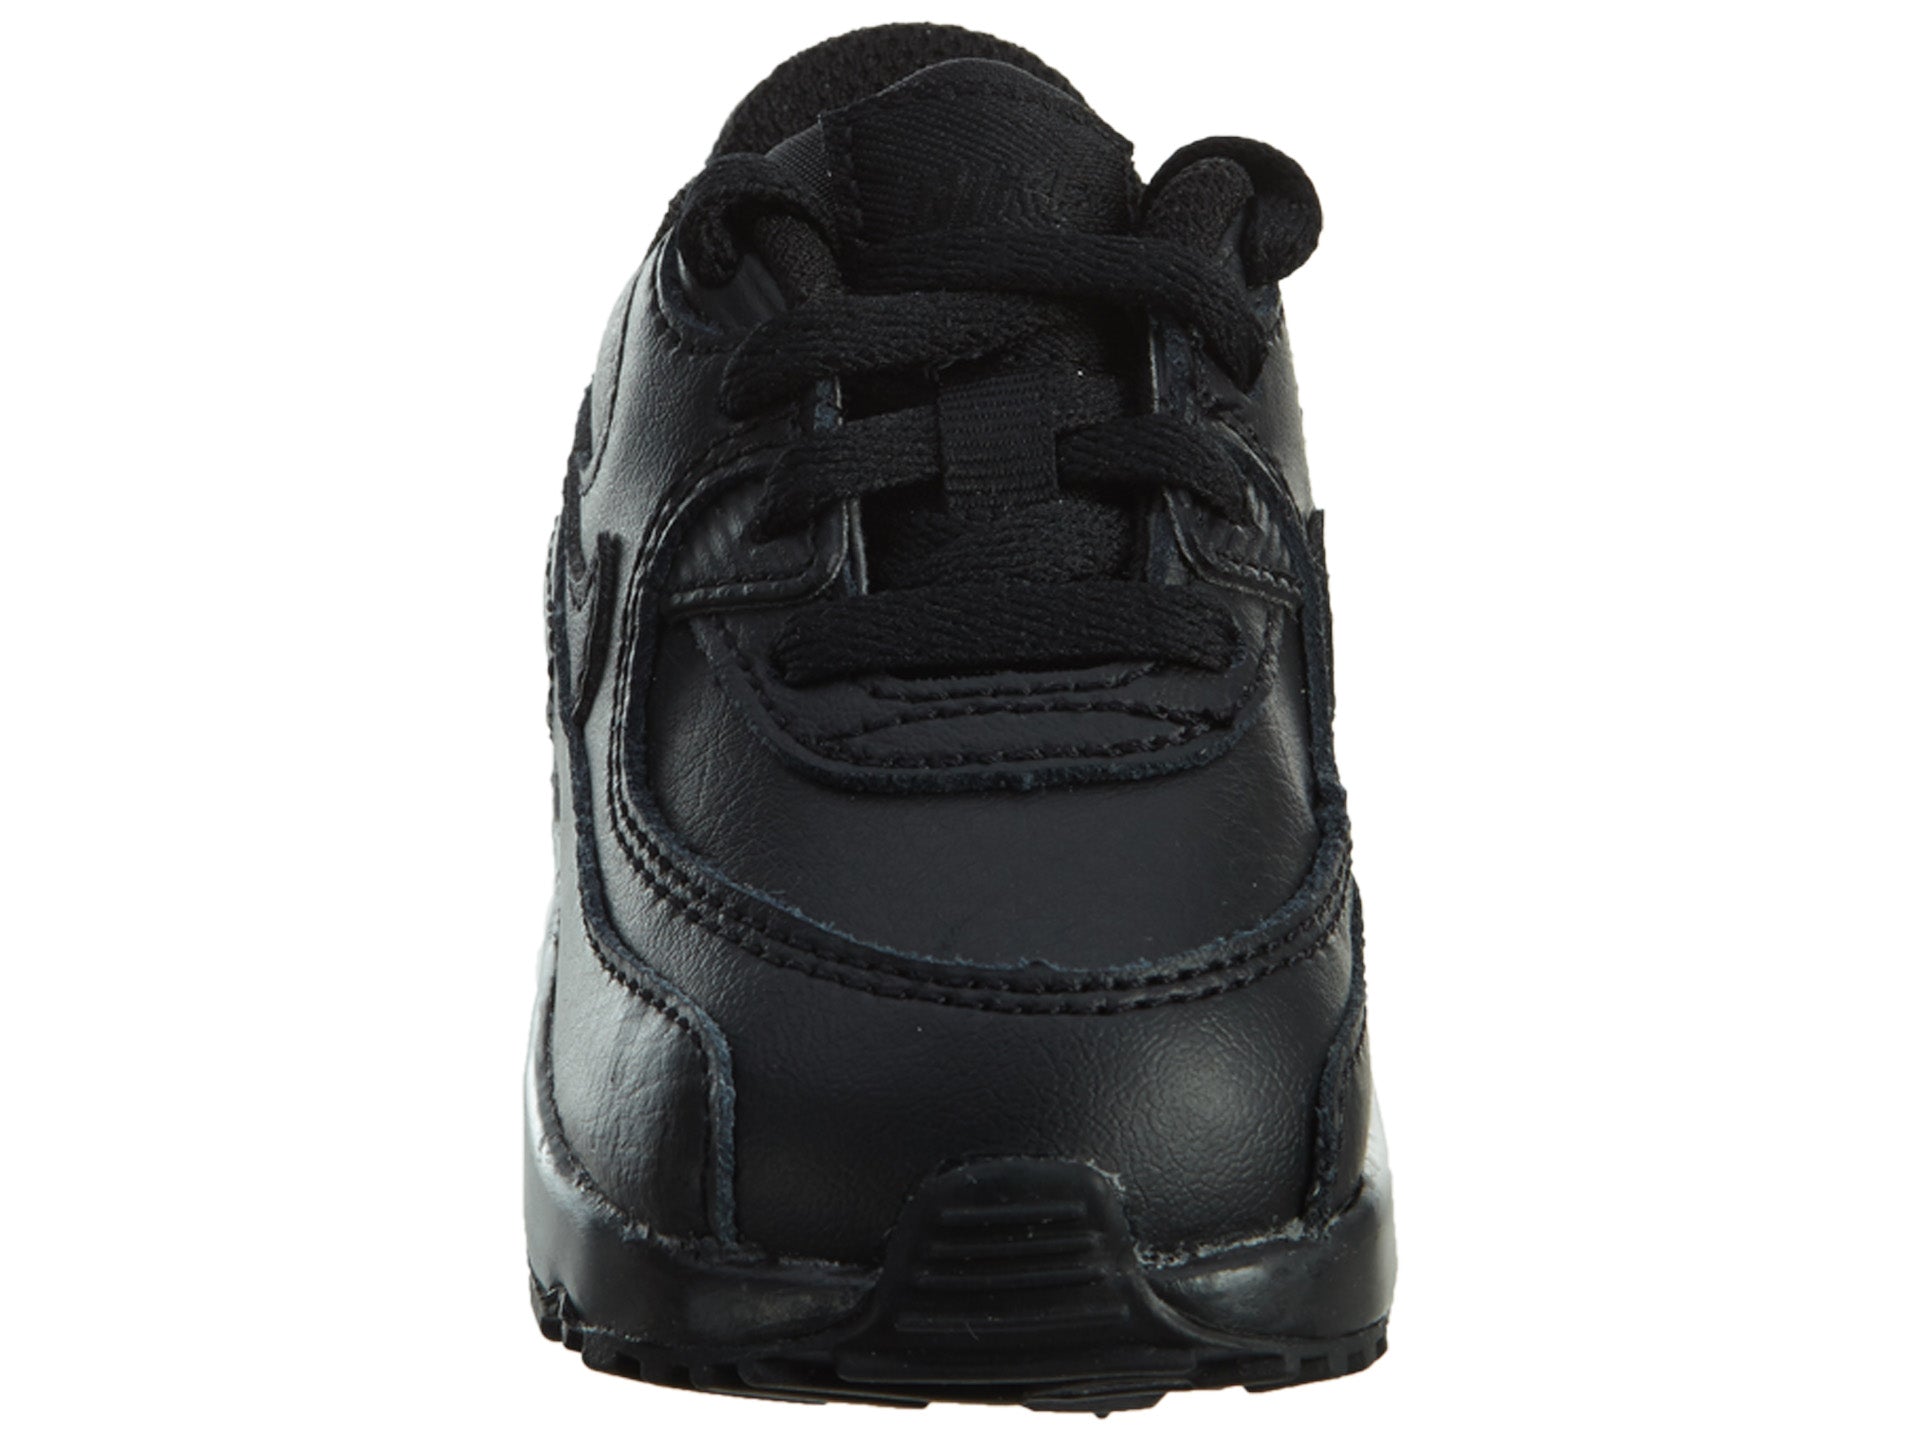 Nike Air Max 90 All Black Shoes Boys / Girls Style :833416